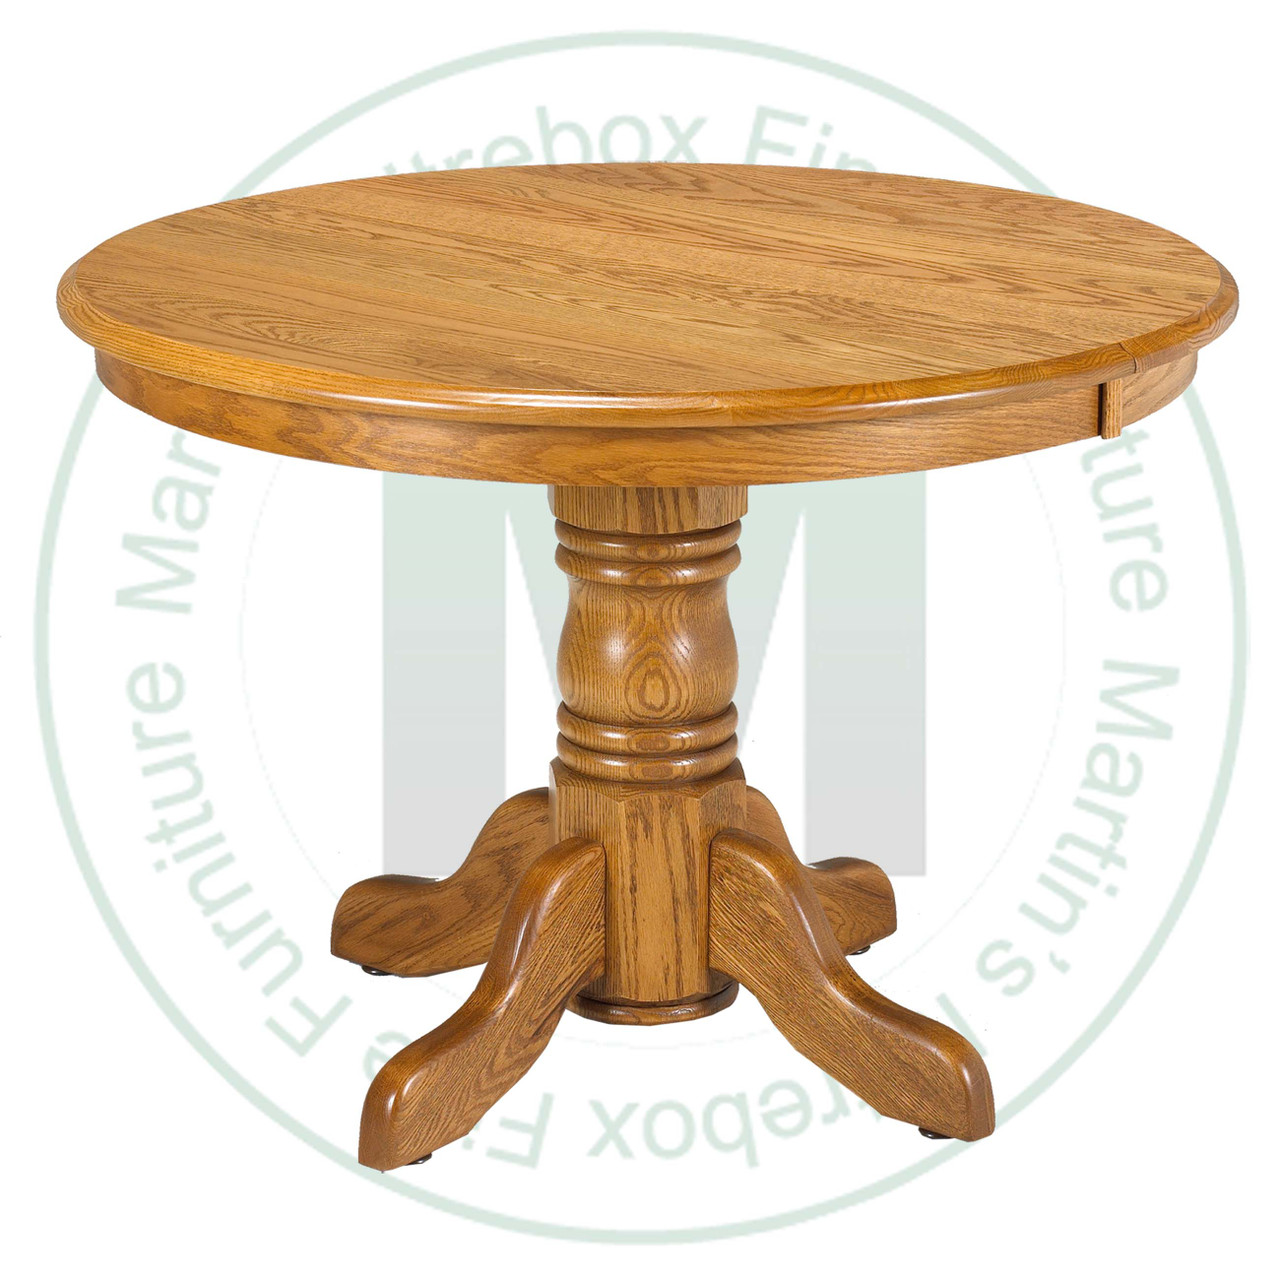 Oak Lancaster Collection Single Pedestal Table 48''D x 54''W x 30''H  Round Solid Table. Table Has 1'' Thick Top